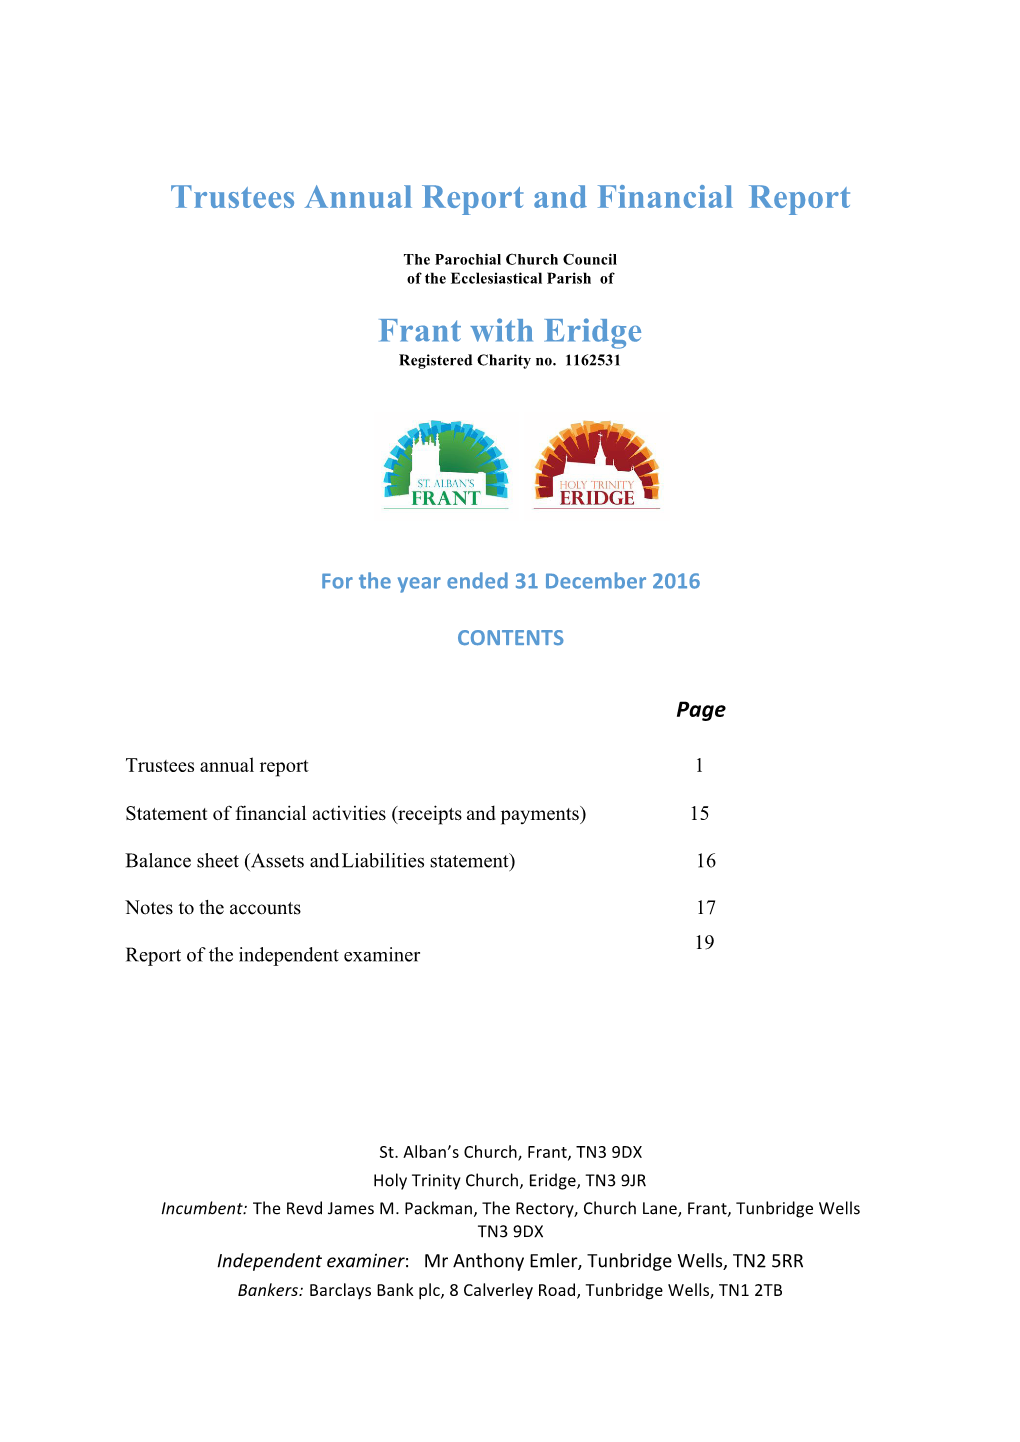 Trustees Annual Report and Financial Report Frant with Eridge